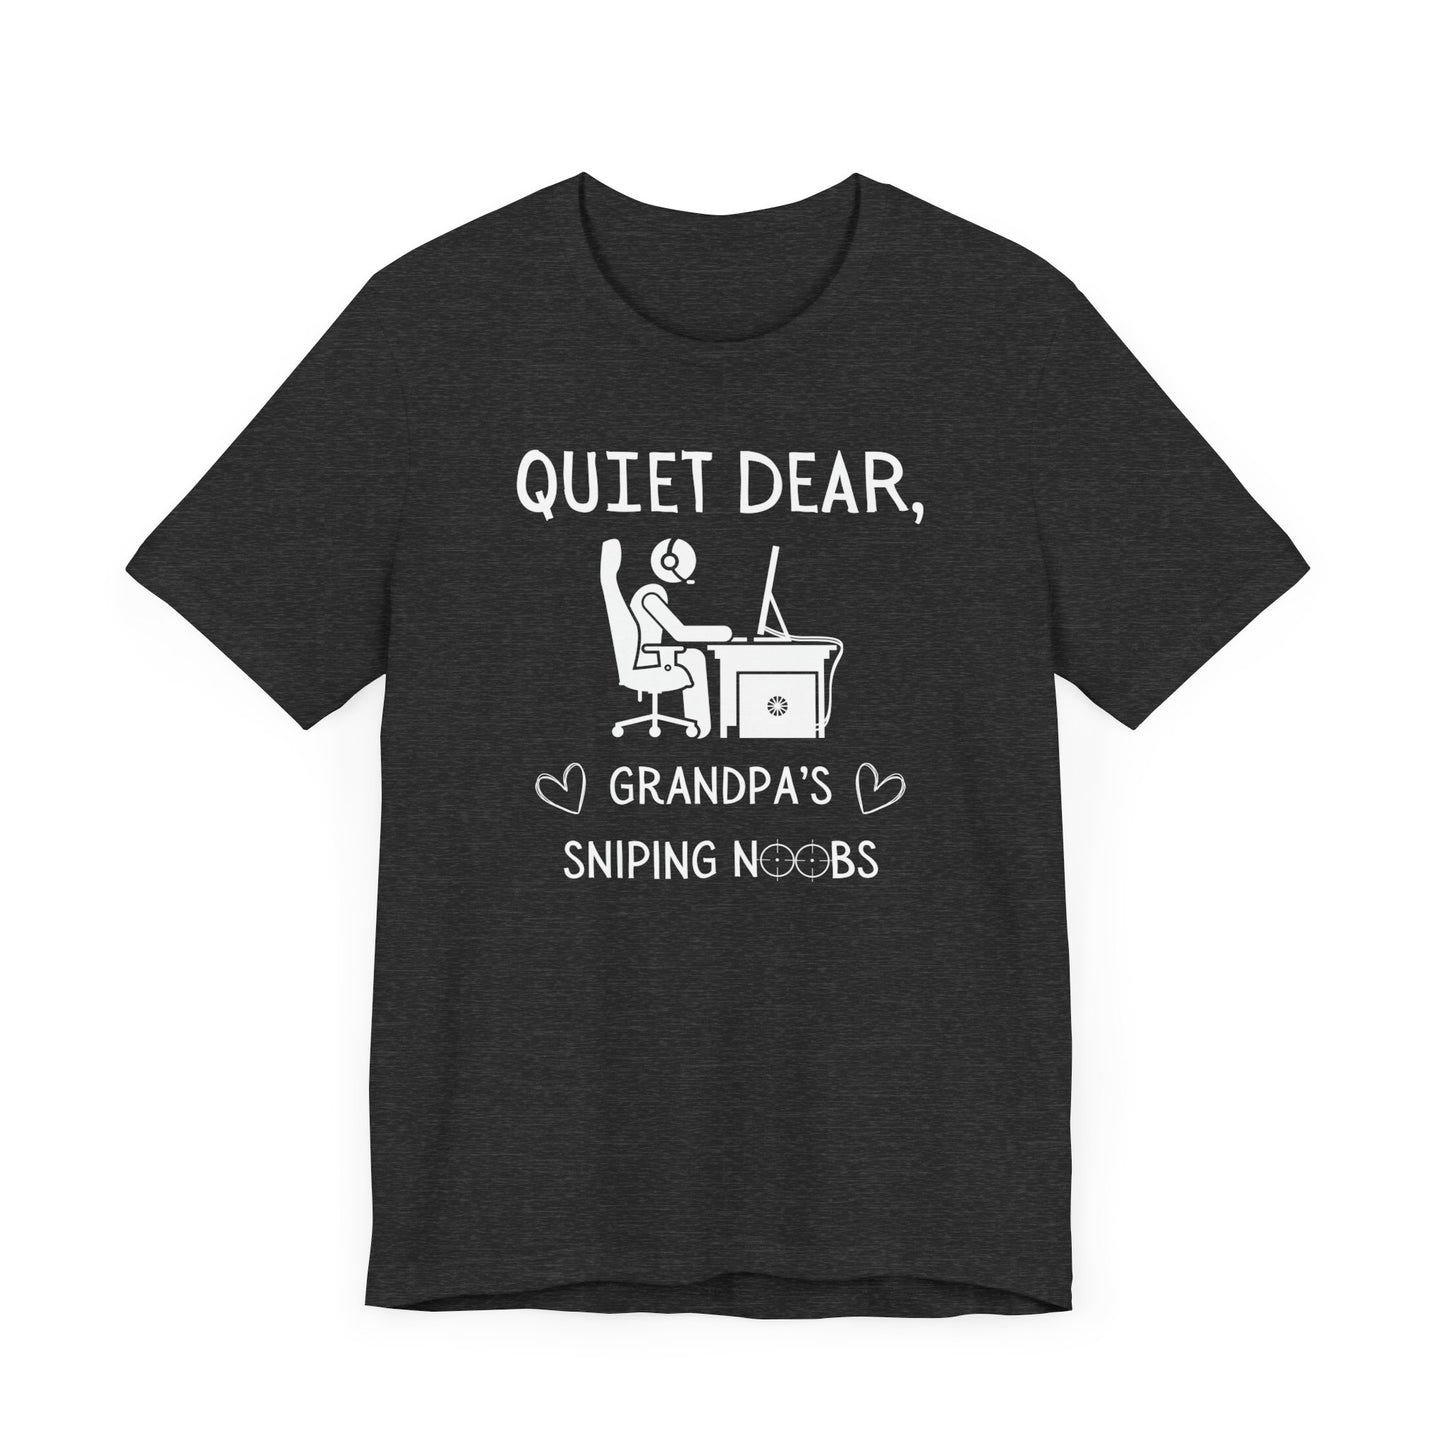 A flat image of a dark gray heather t-shirt that reads Quiet Dear, Grandpa's Sniping Noobs in white text. The lower text is framed by two hearts, and the O's are in the shape of sniper scopes. In the center of the shirt is an image of a person at a desk with a gaming PC.